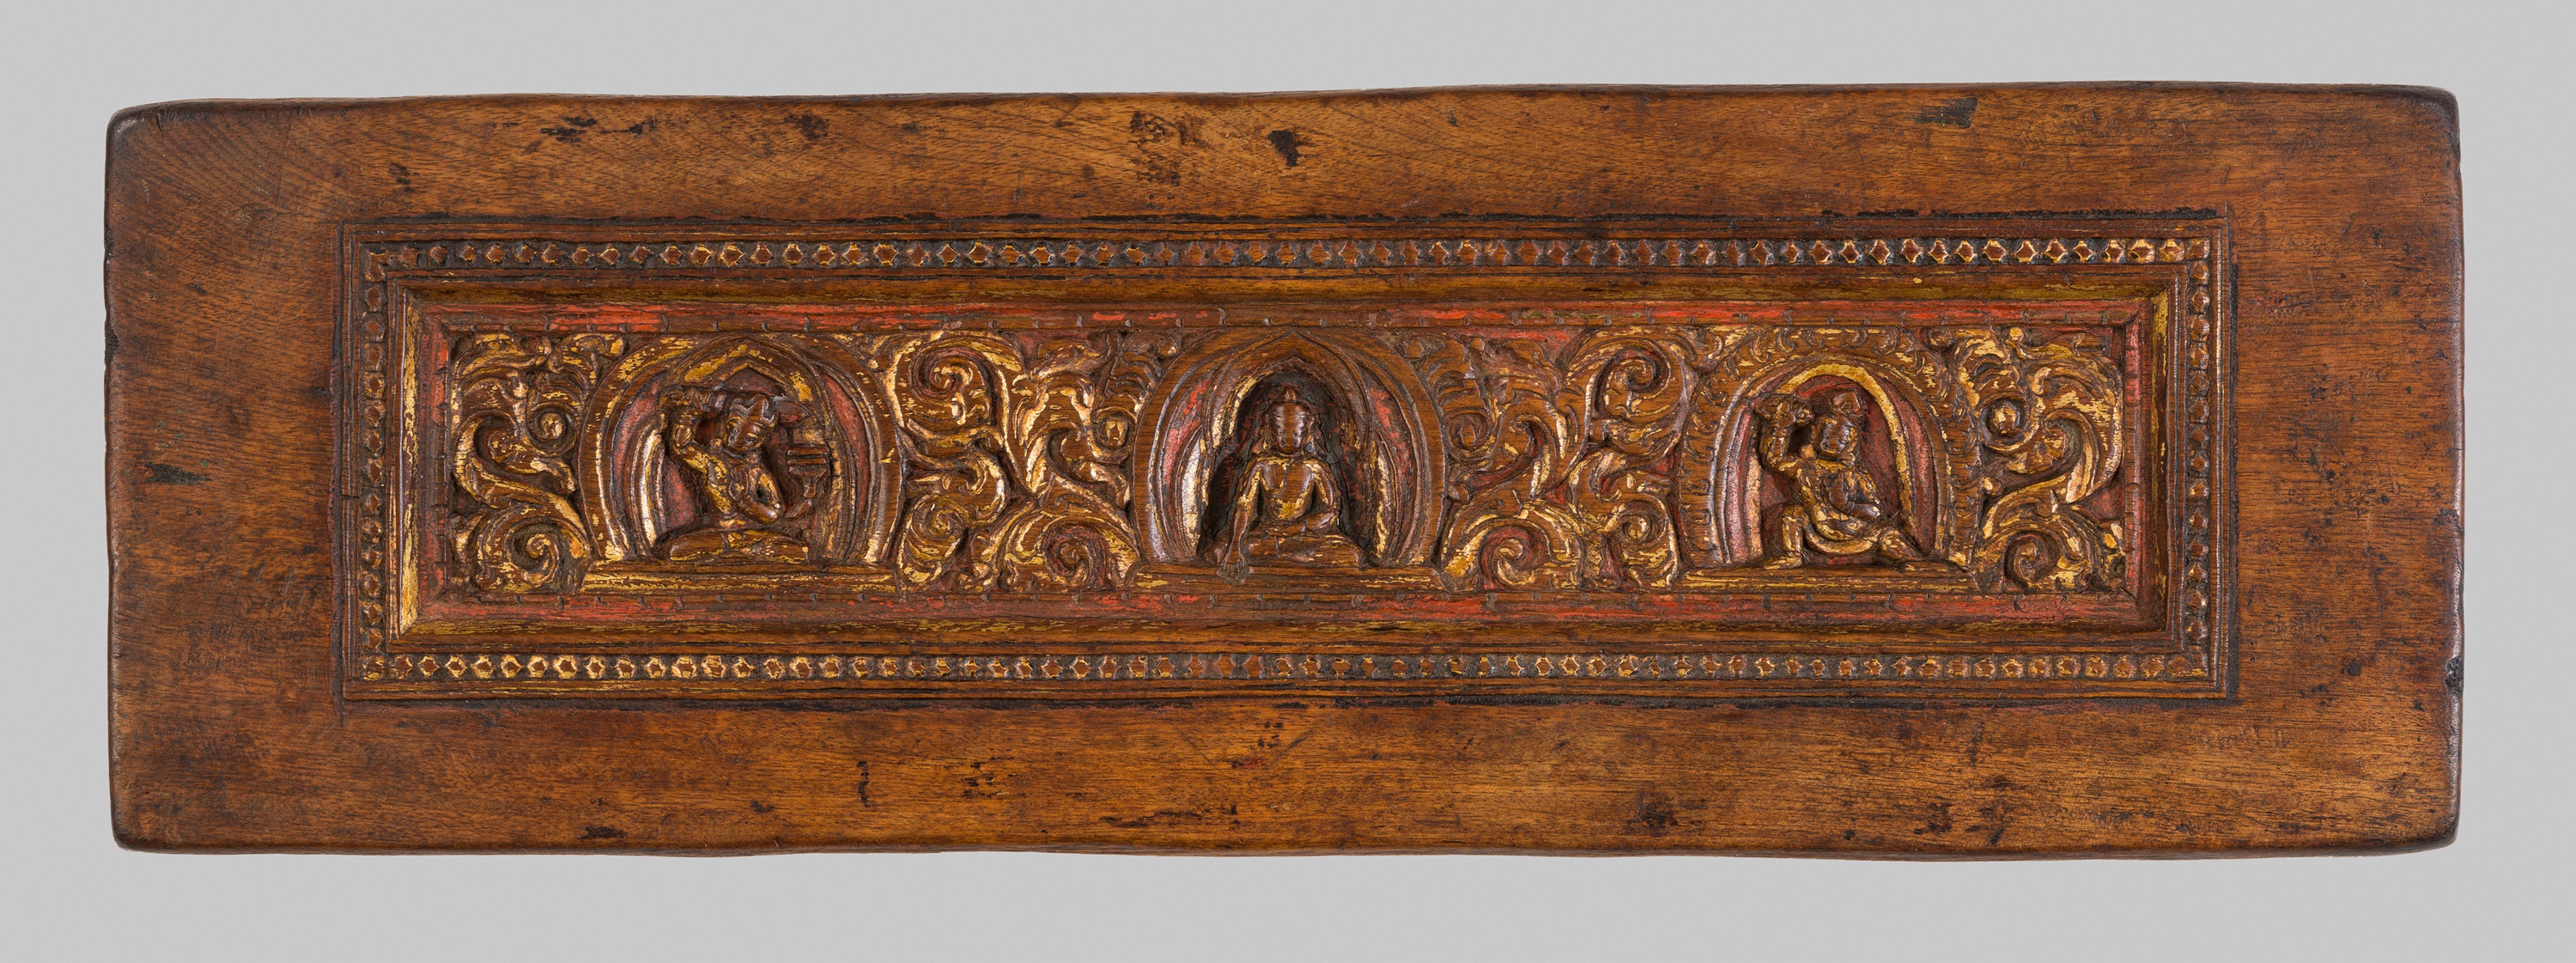 A GILT AND PAINTED WOOD MANUSCRIPT COVER DEPICTING A BUDDHIST TRIAD, TIBET, 12TH-13TH CENTURY